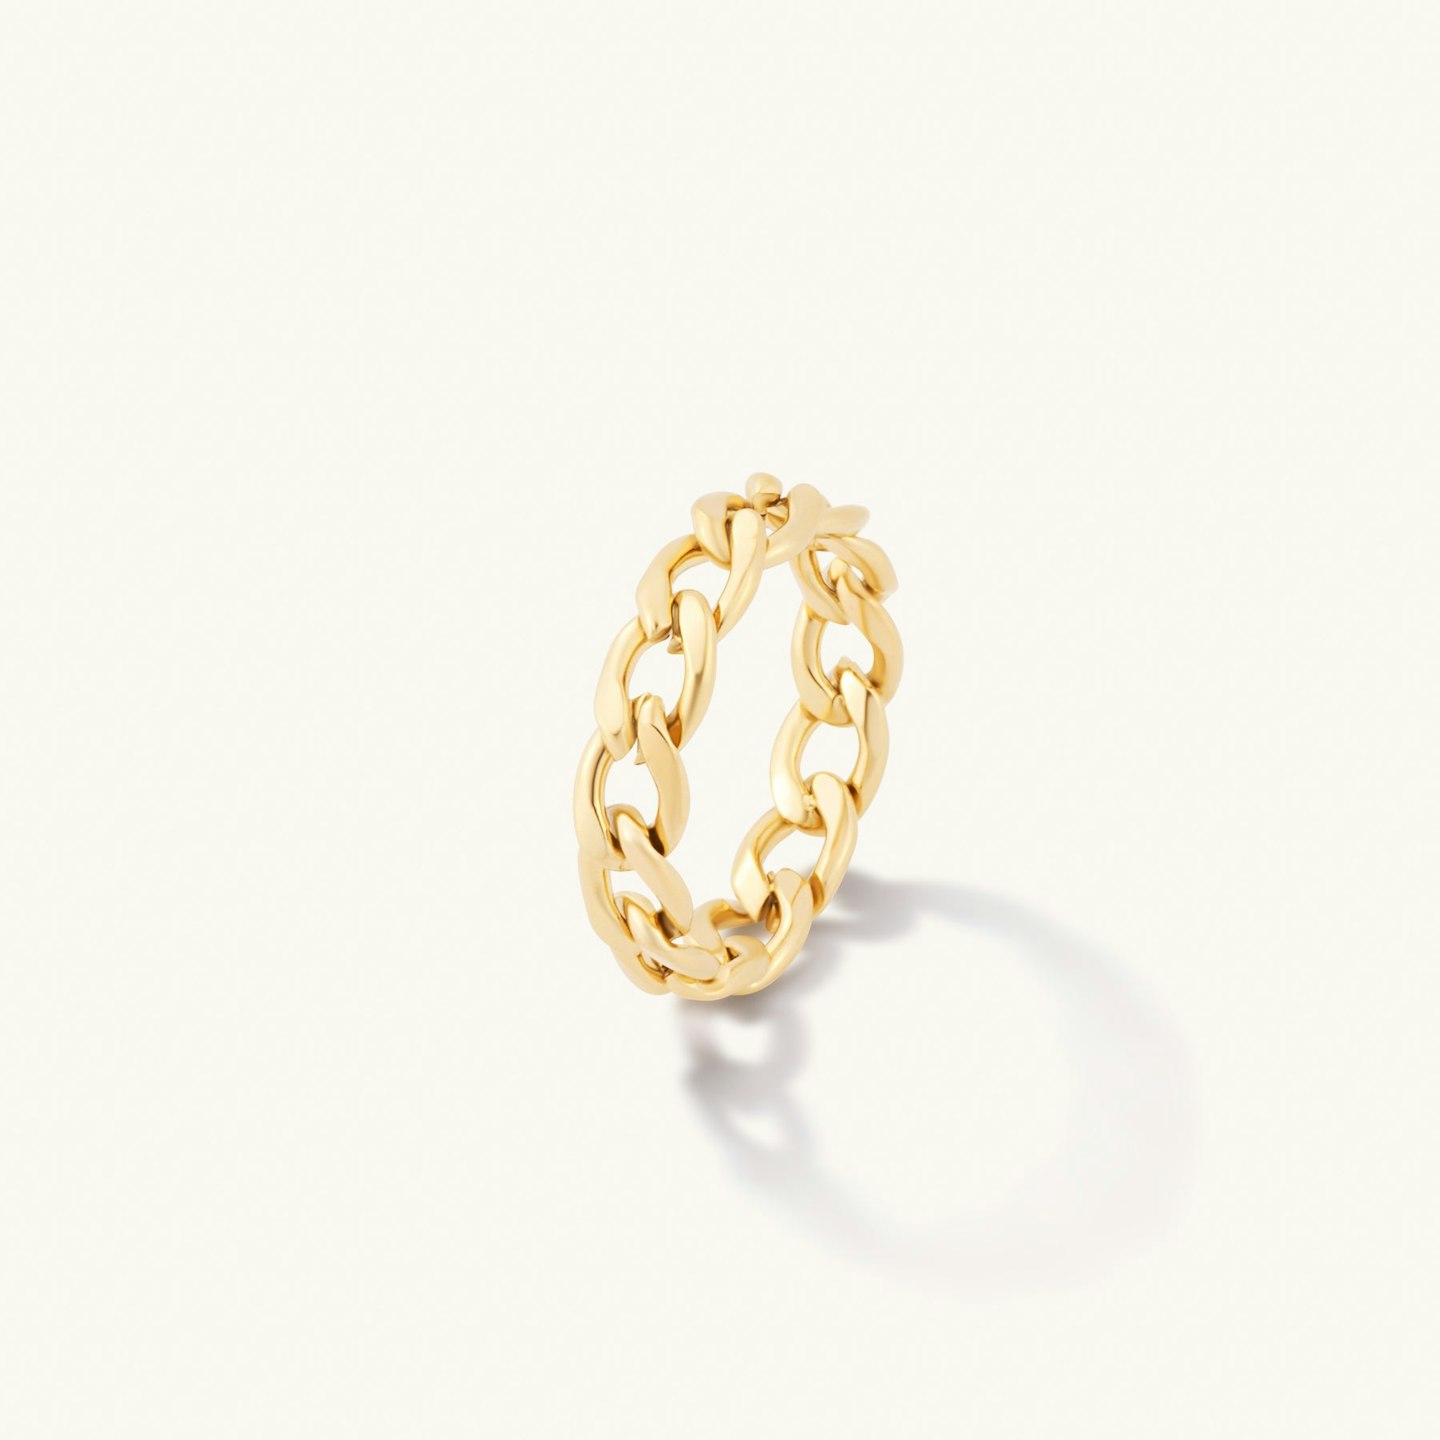 The Best Gold Jewellery For Women Under £150 2022